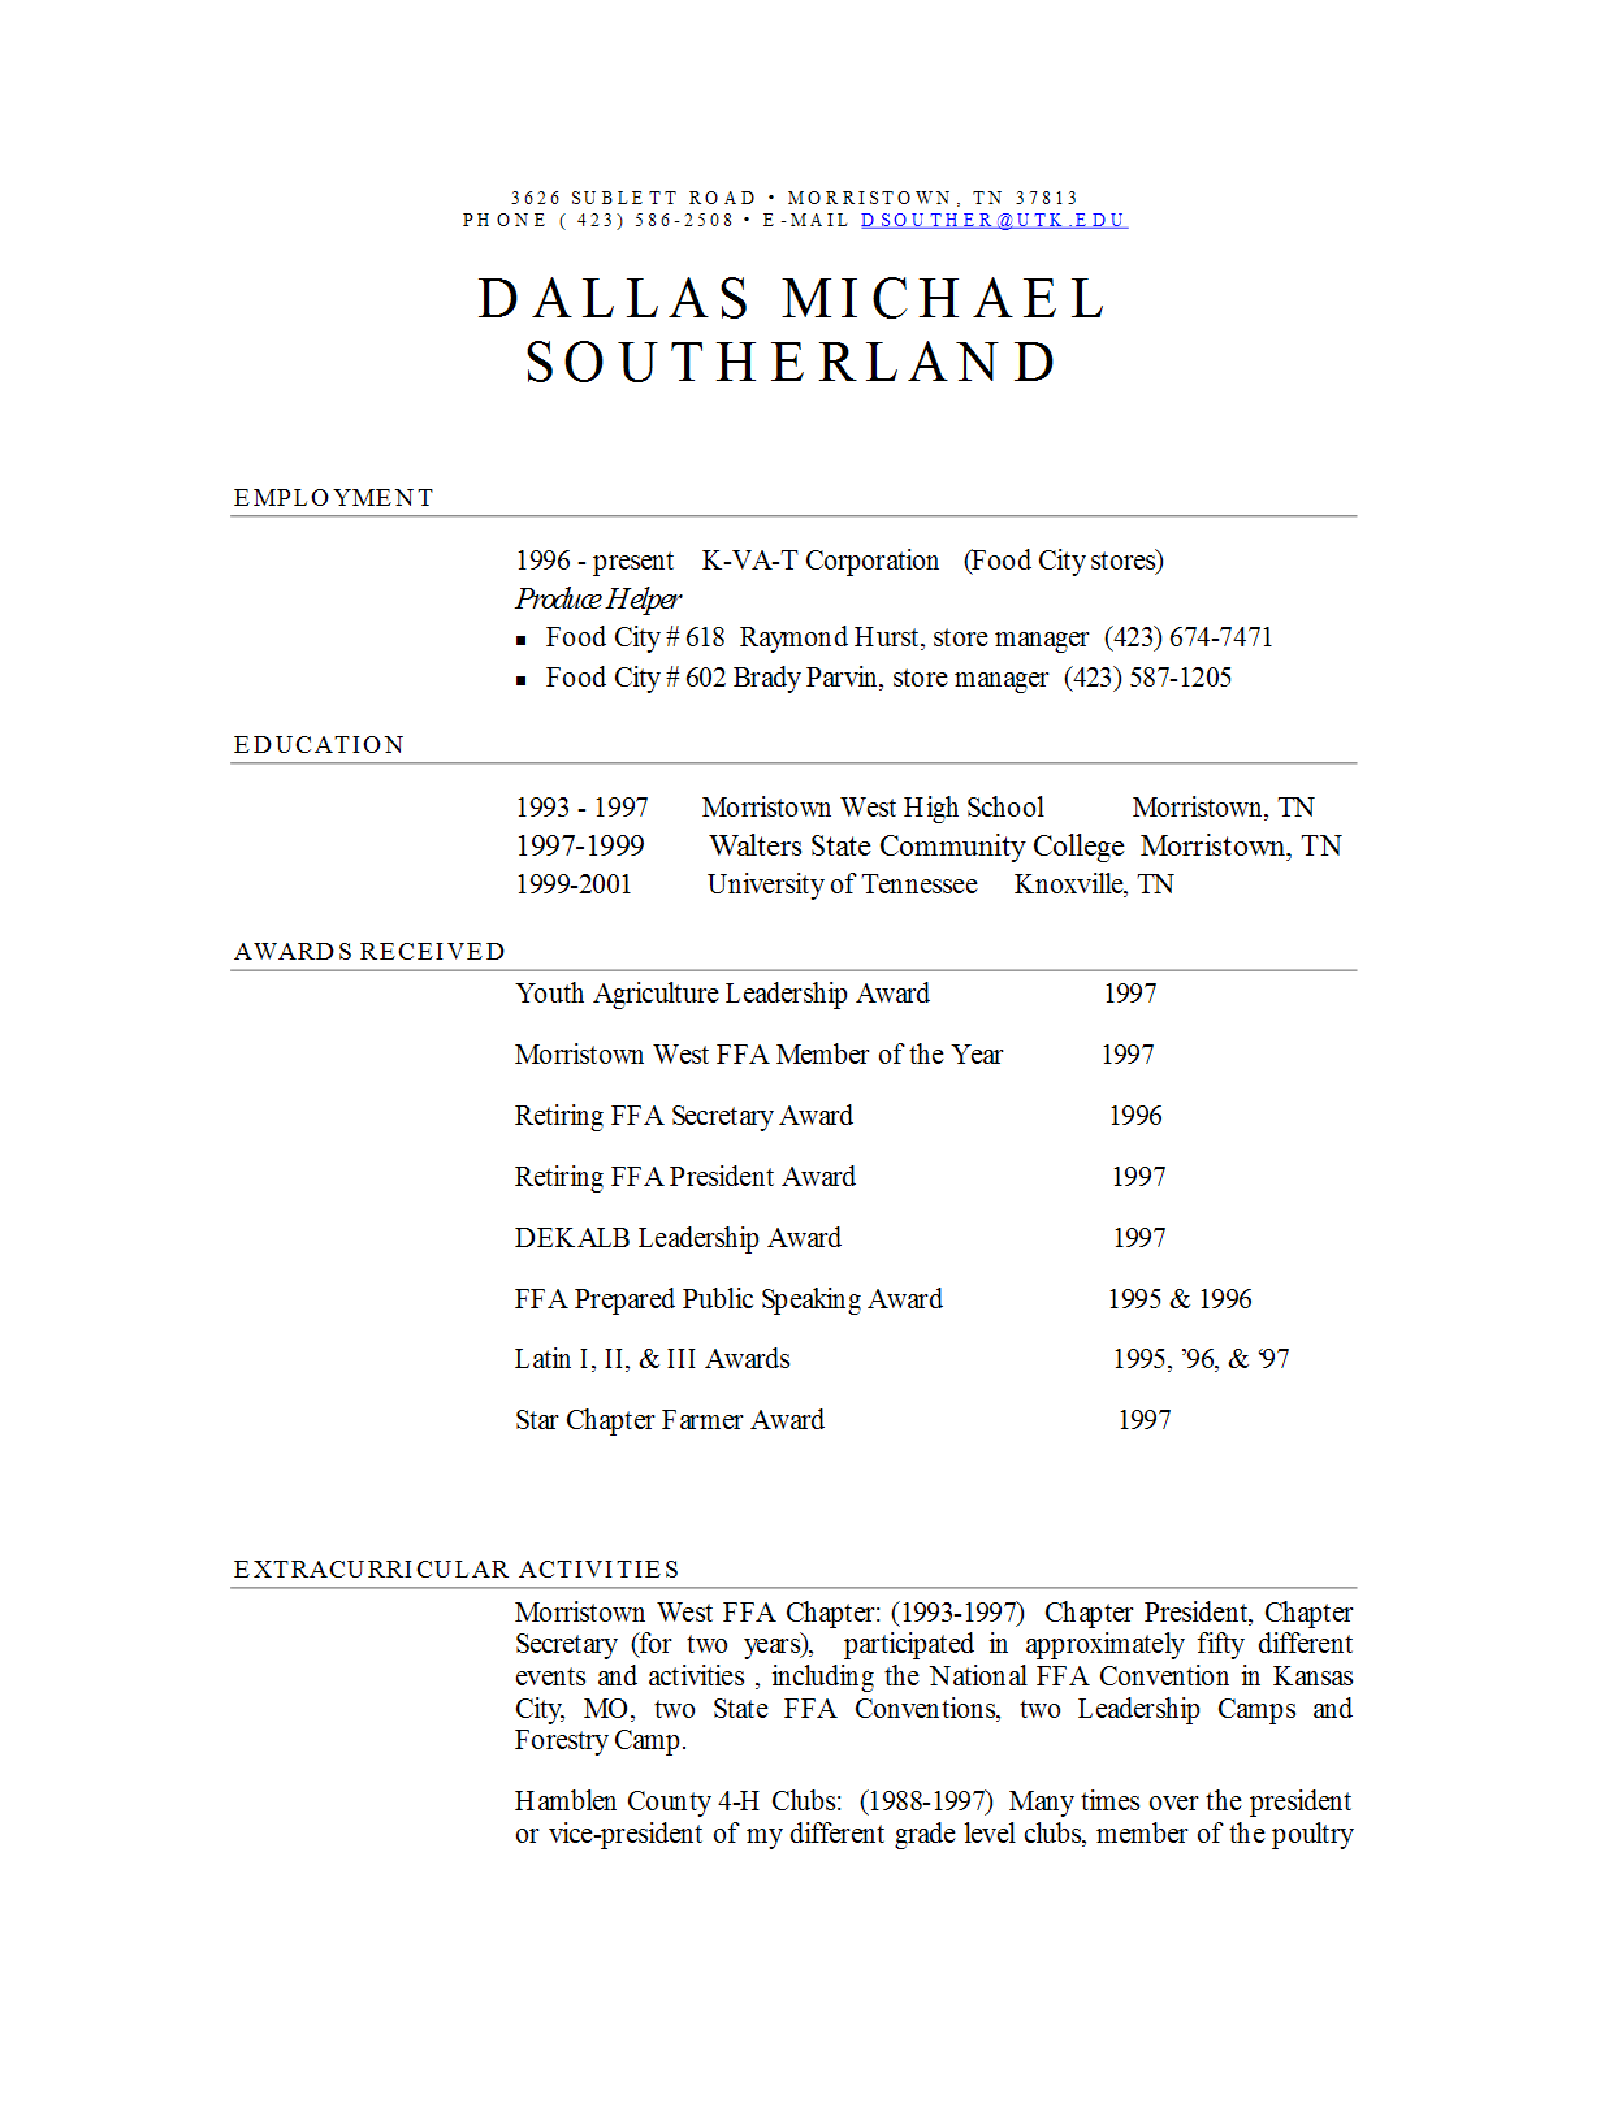 Copy of Dallas Michael Southerland Resume1.png